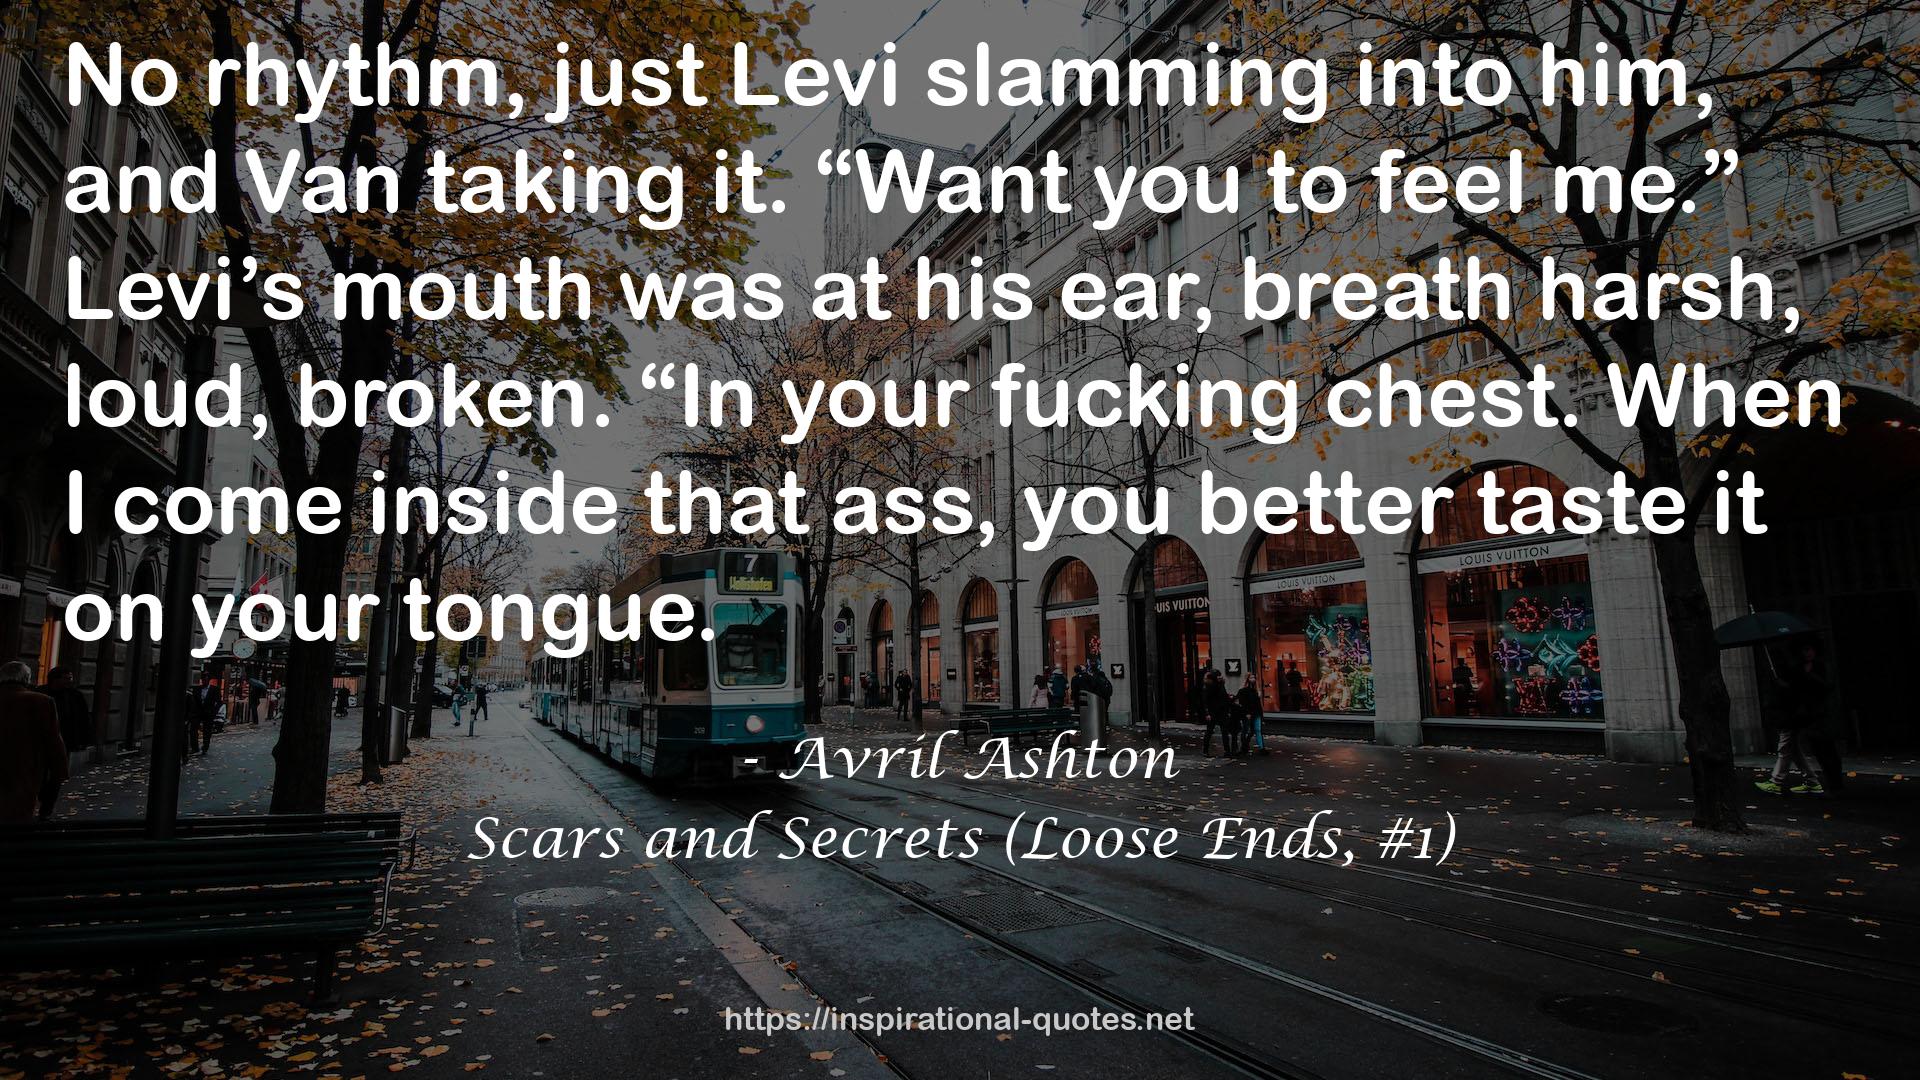 Scars and Secrets (Loose Ends, #1) QUOTES